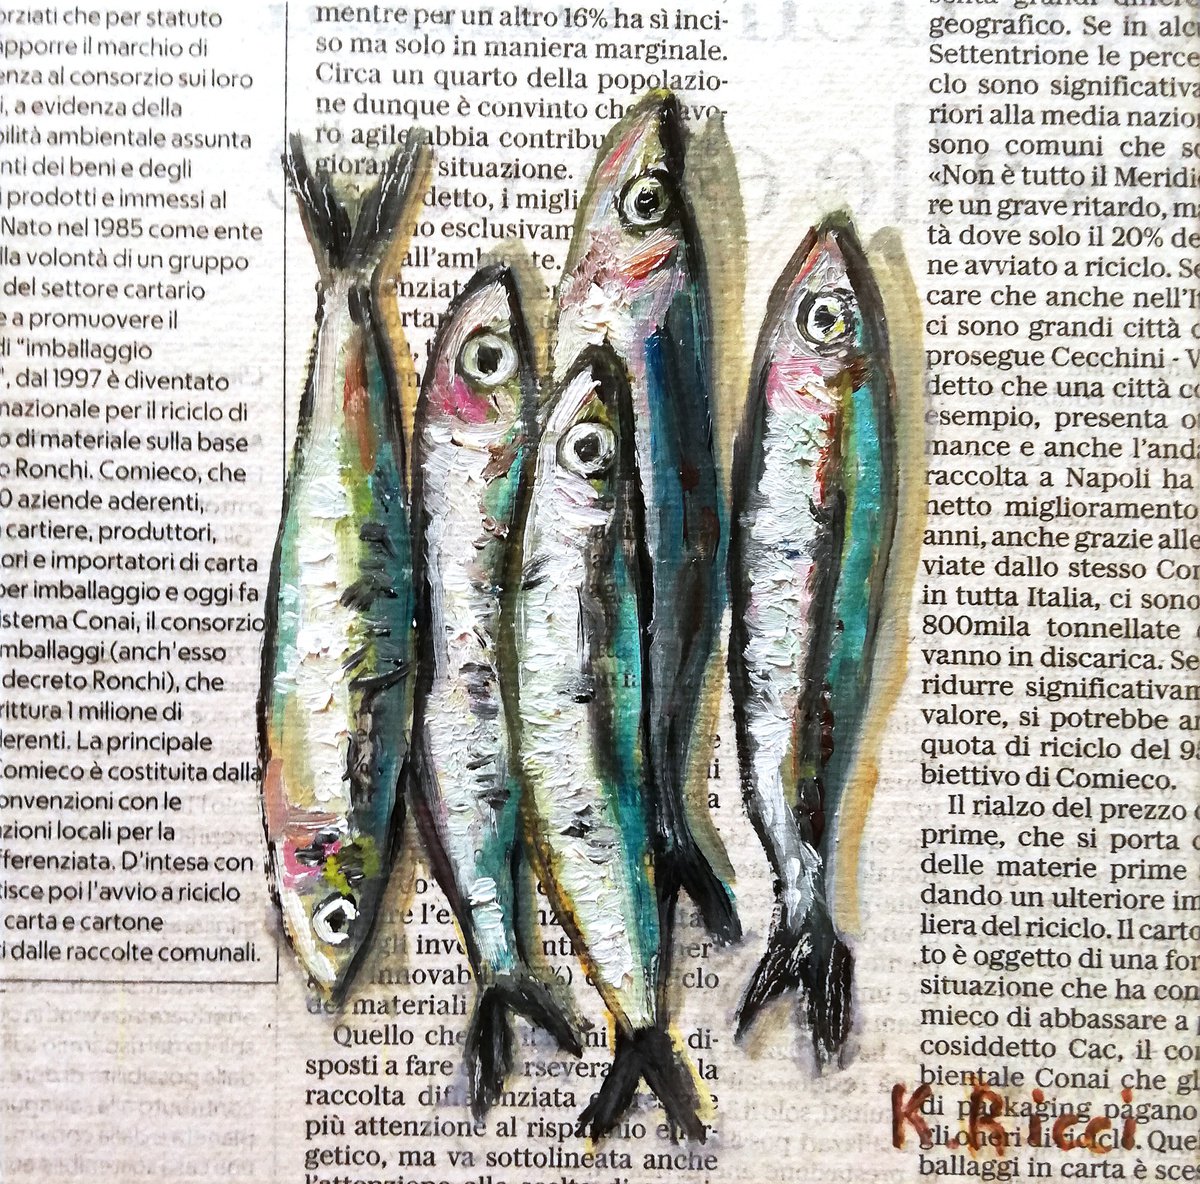 Small Fishes on Newspaper Original Oil on Canvas Board Painting 6 by 6 inches (15x15 cm) by Katia Ricci